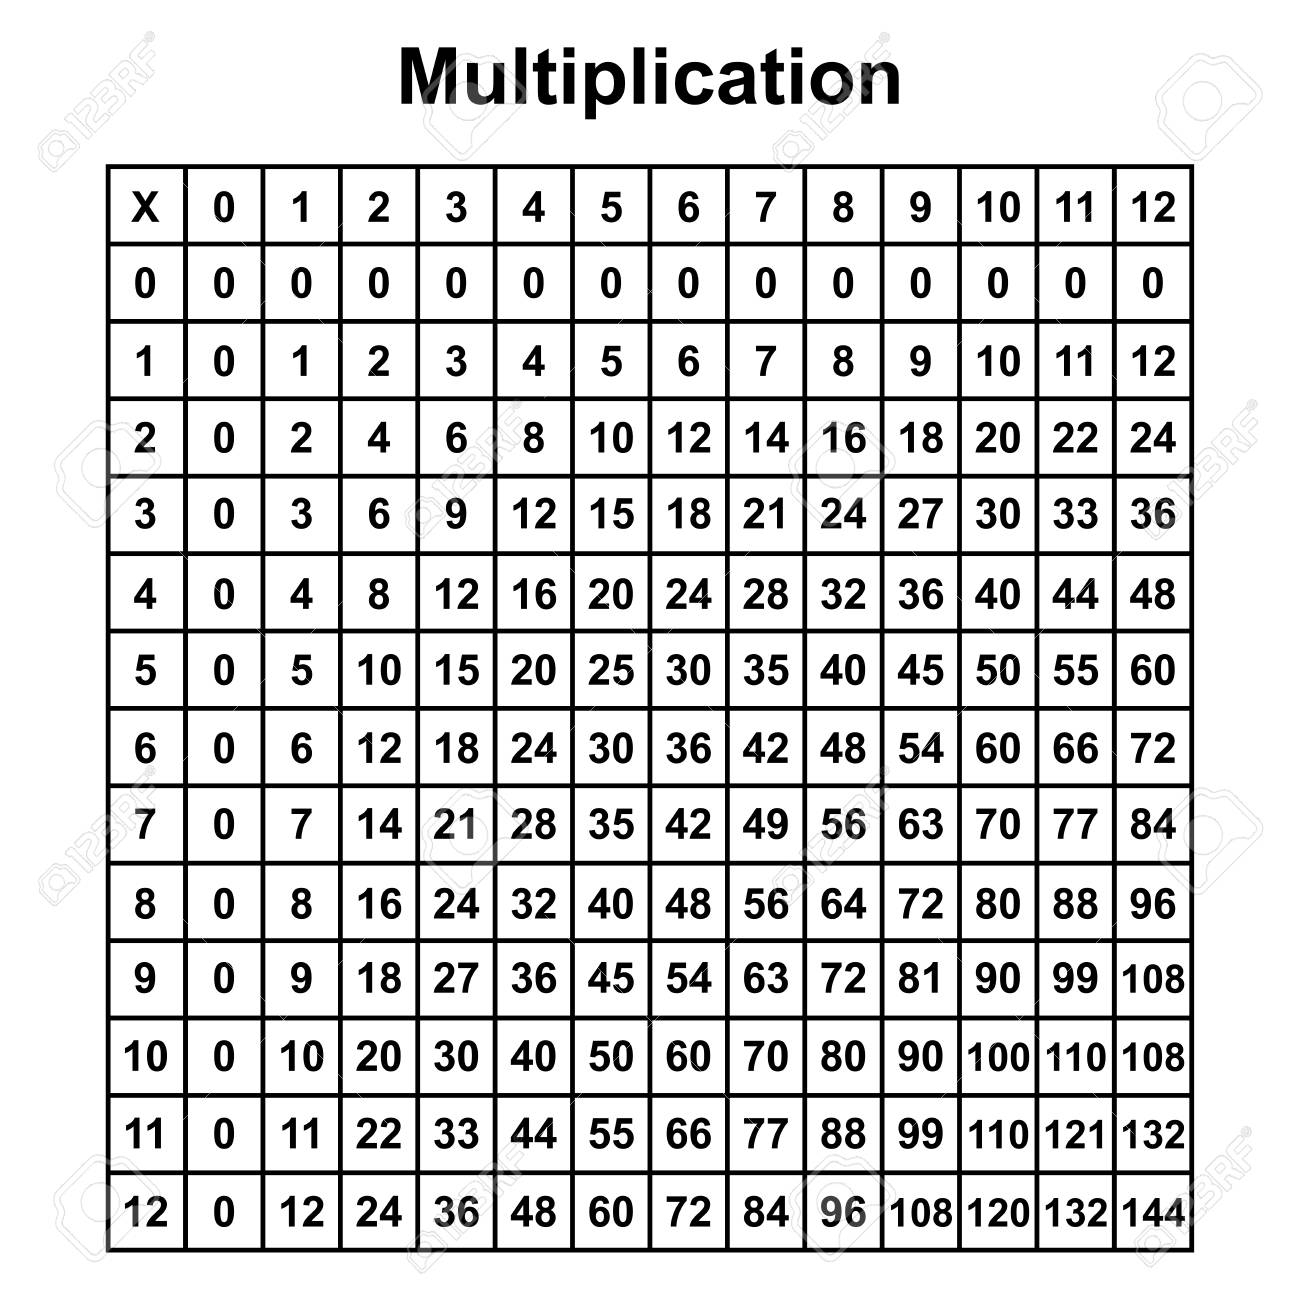 Multiplication Table Chart Or Multiplication Table Printable.. for A Printable Multiplication Chart